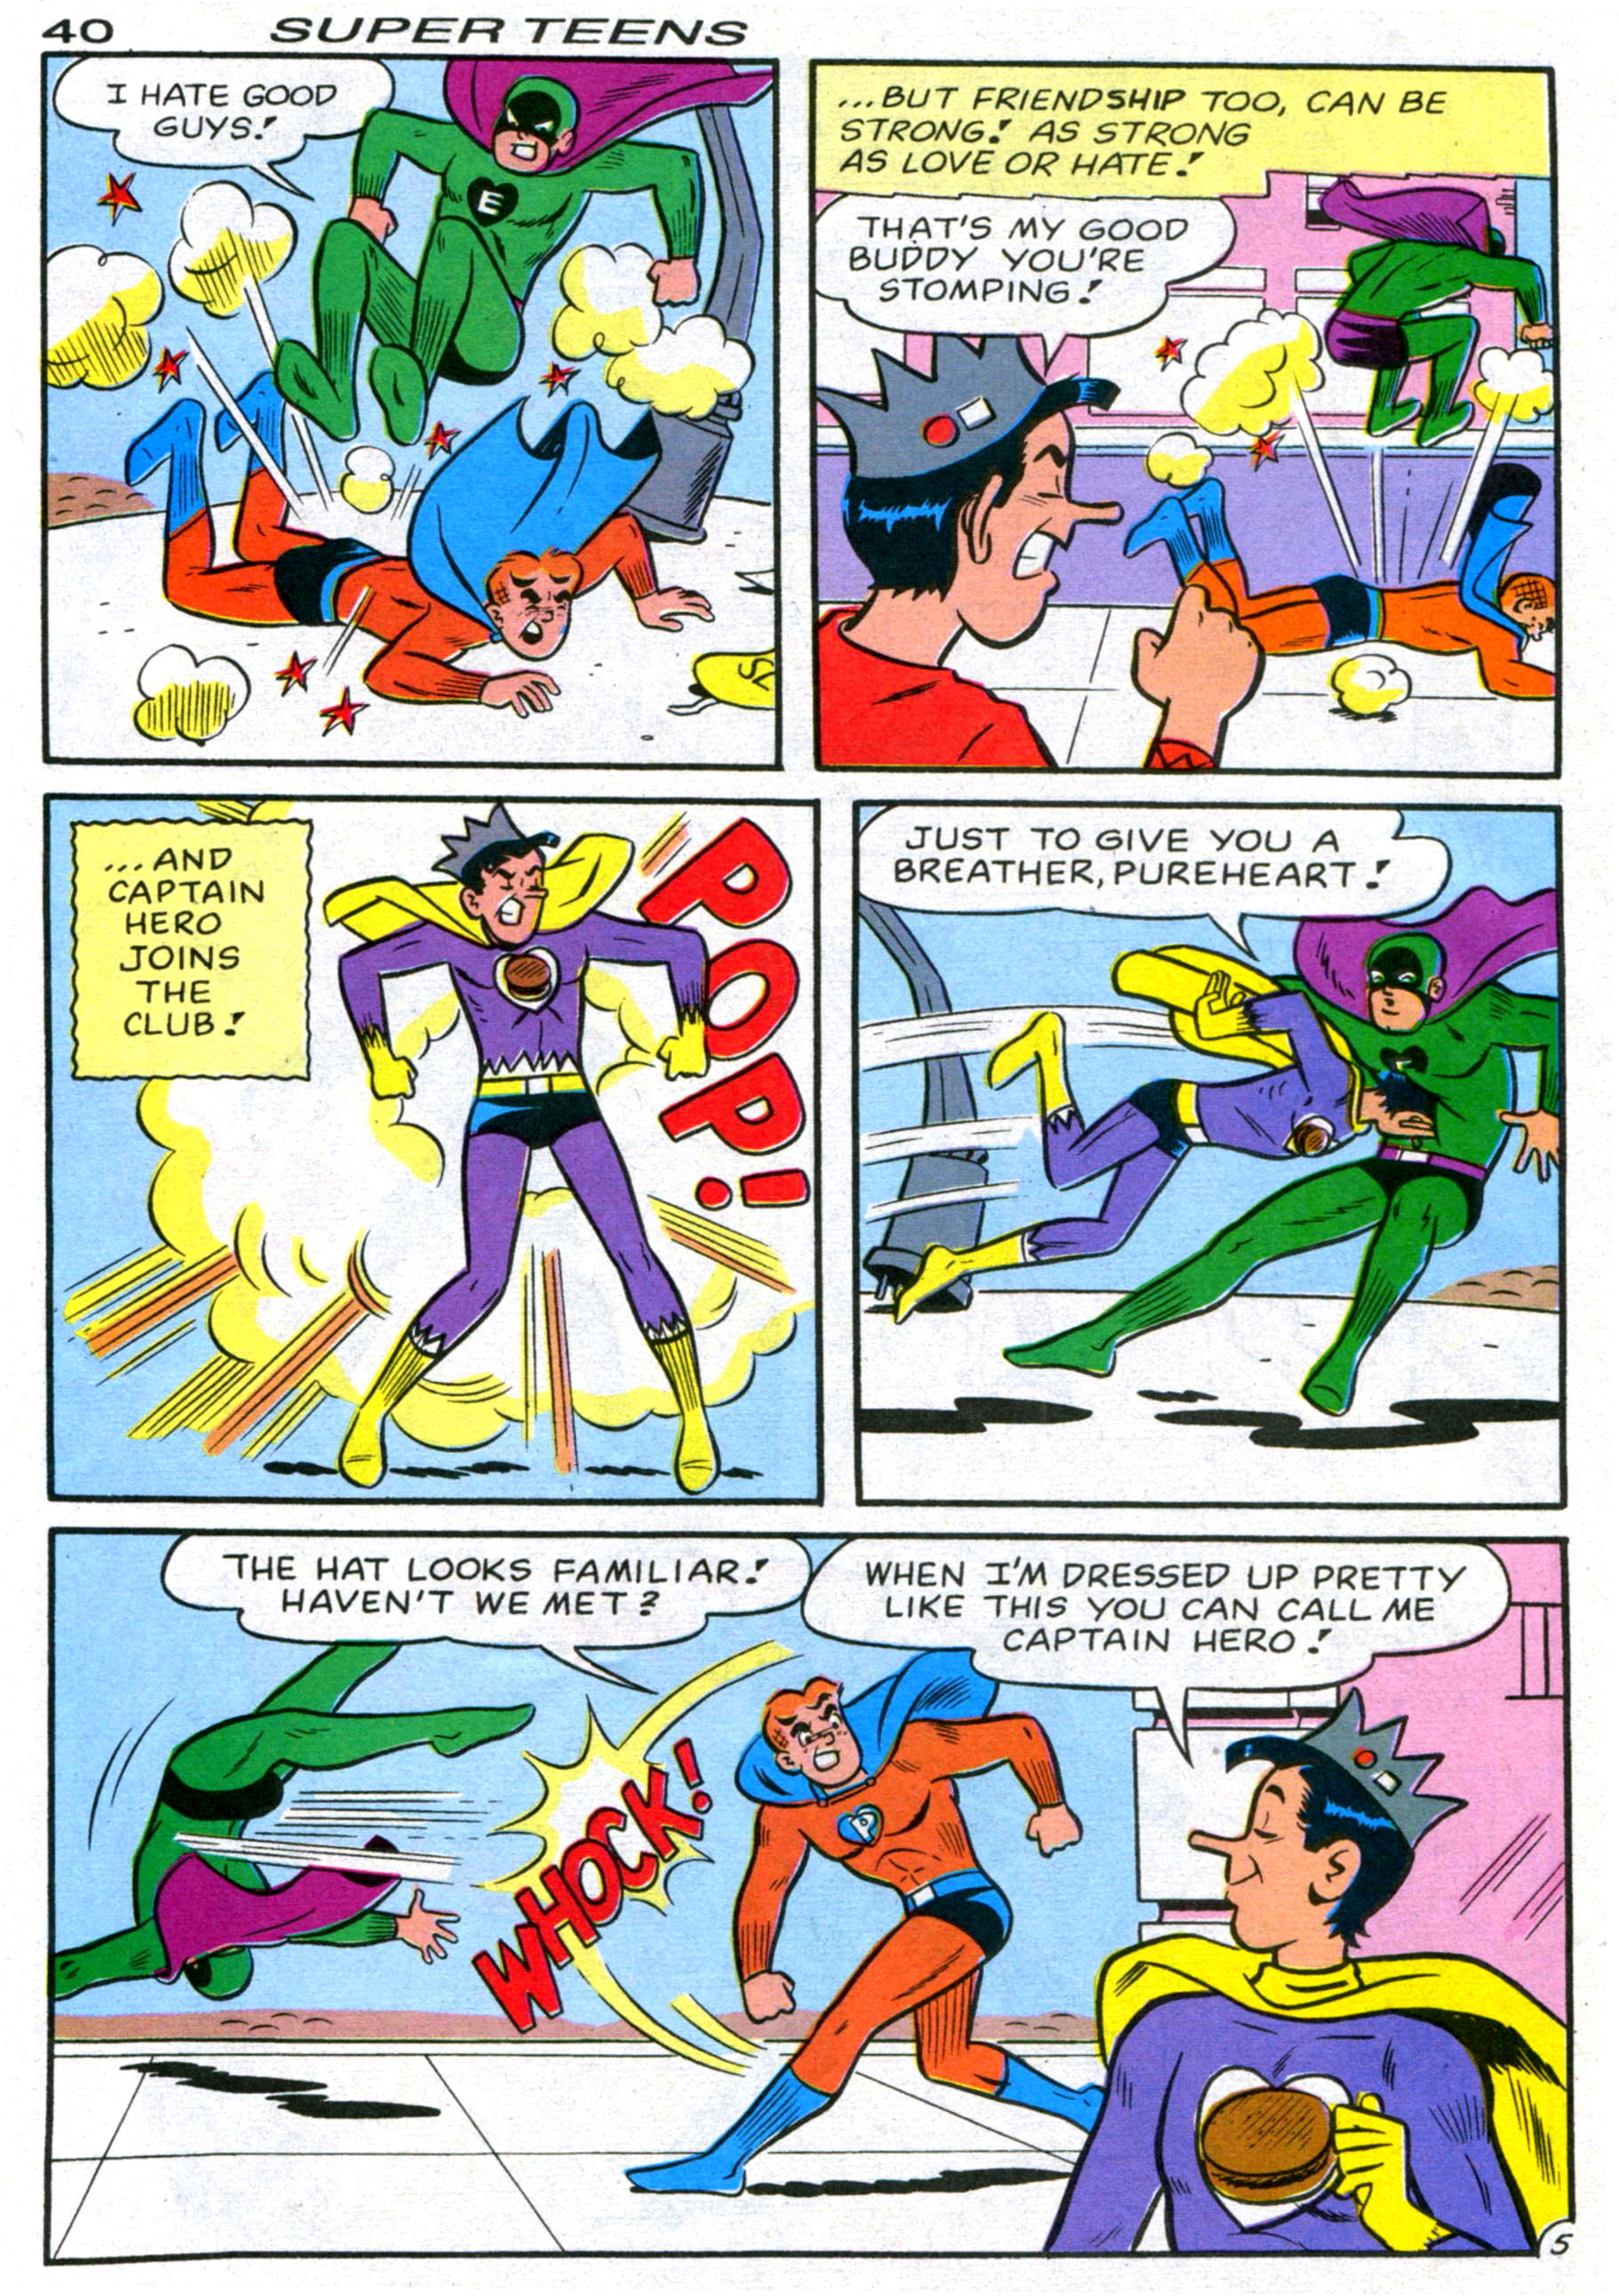 Read online Archie's Super Teens comic -  Issue #1 - 42